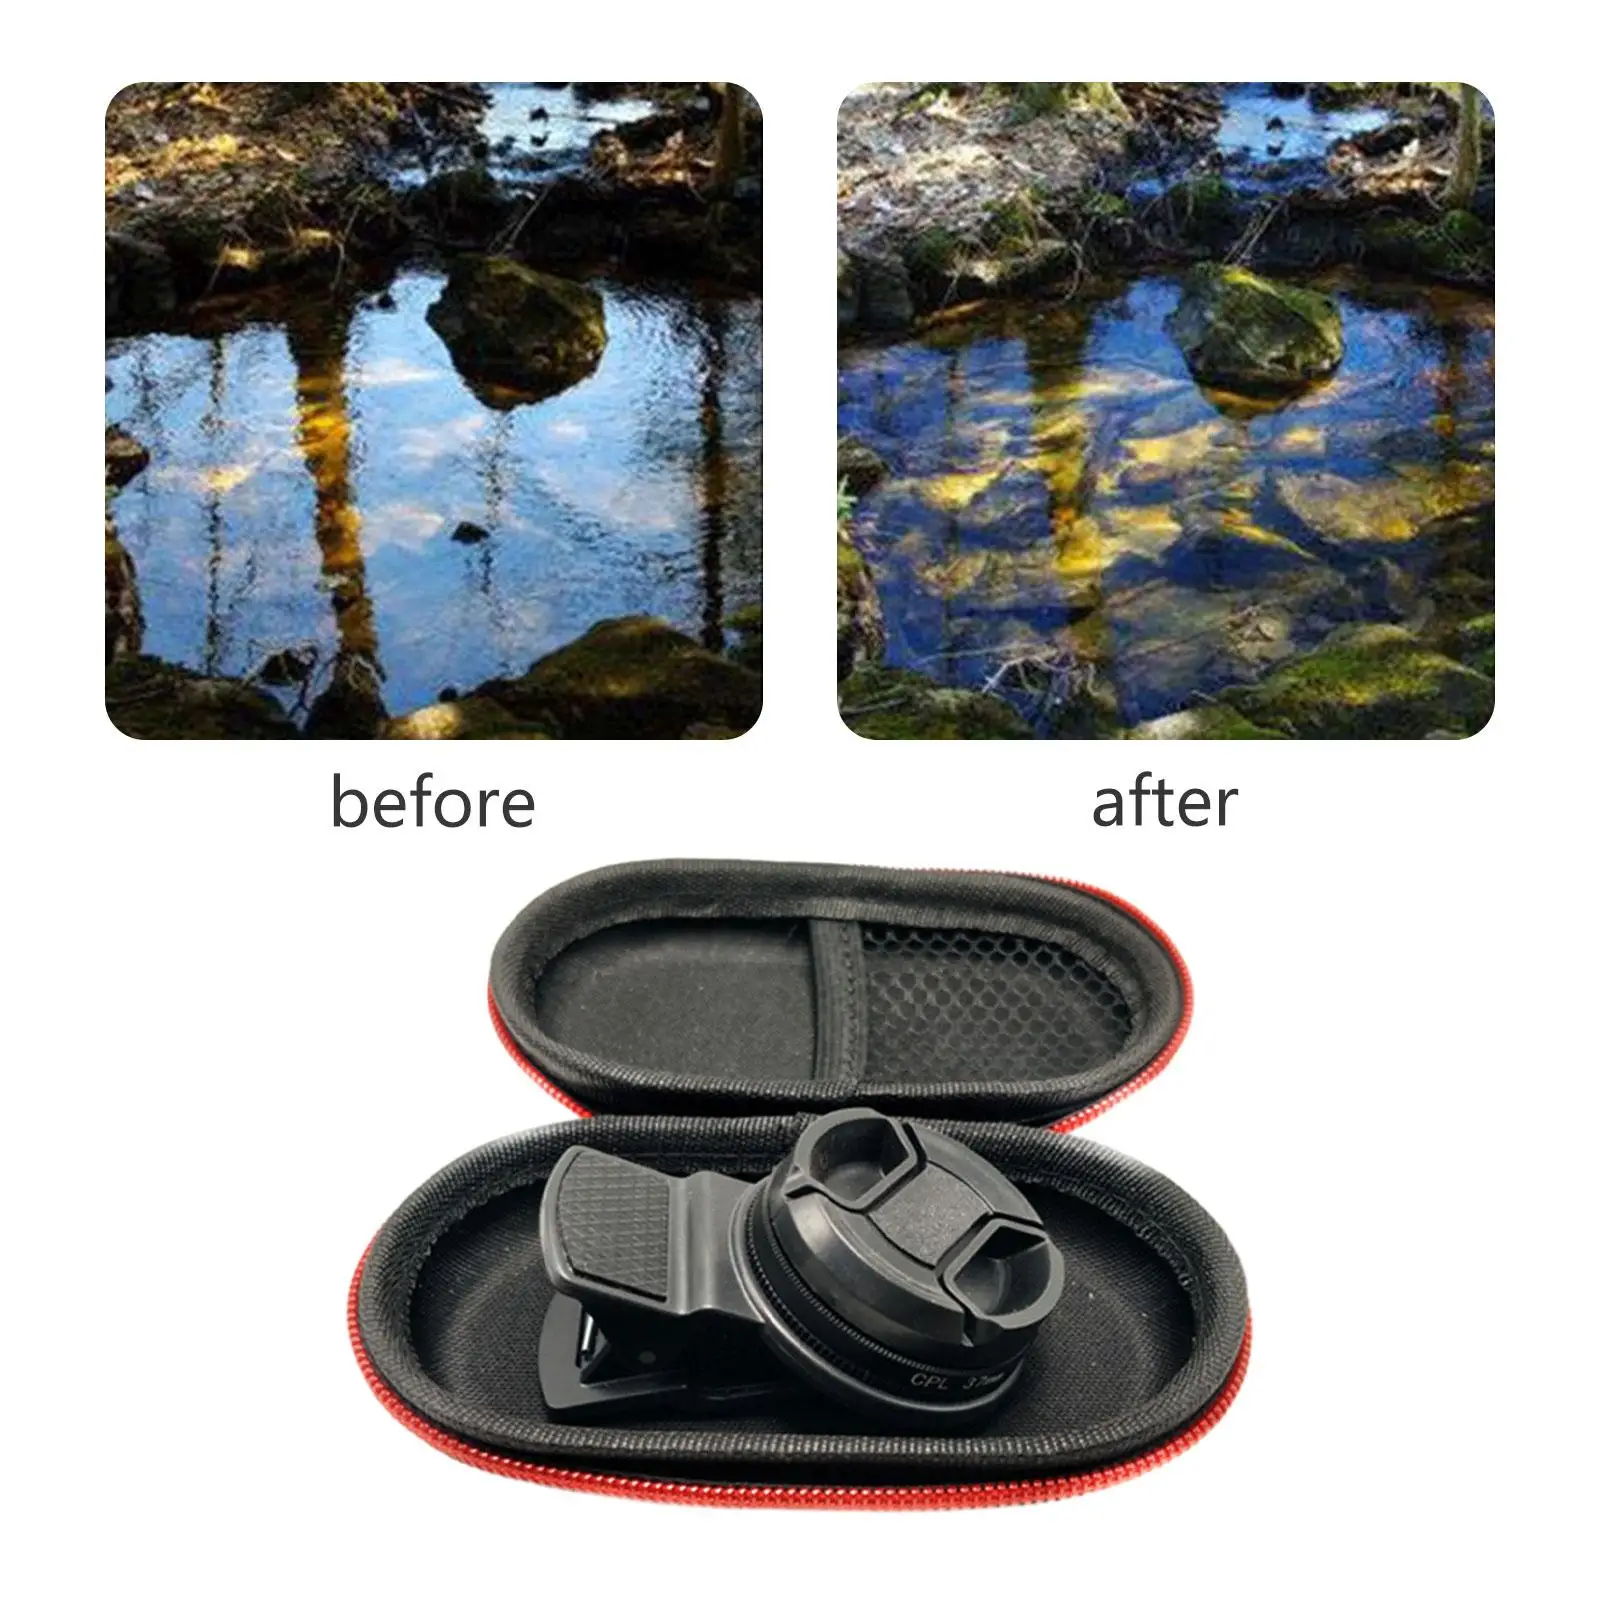 37mm CPL Phone Camera Lens, CPL Polarizing Filter Lens Accessories, Universal Polarized Smartphones Camera Lens, with Bag